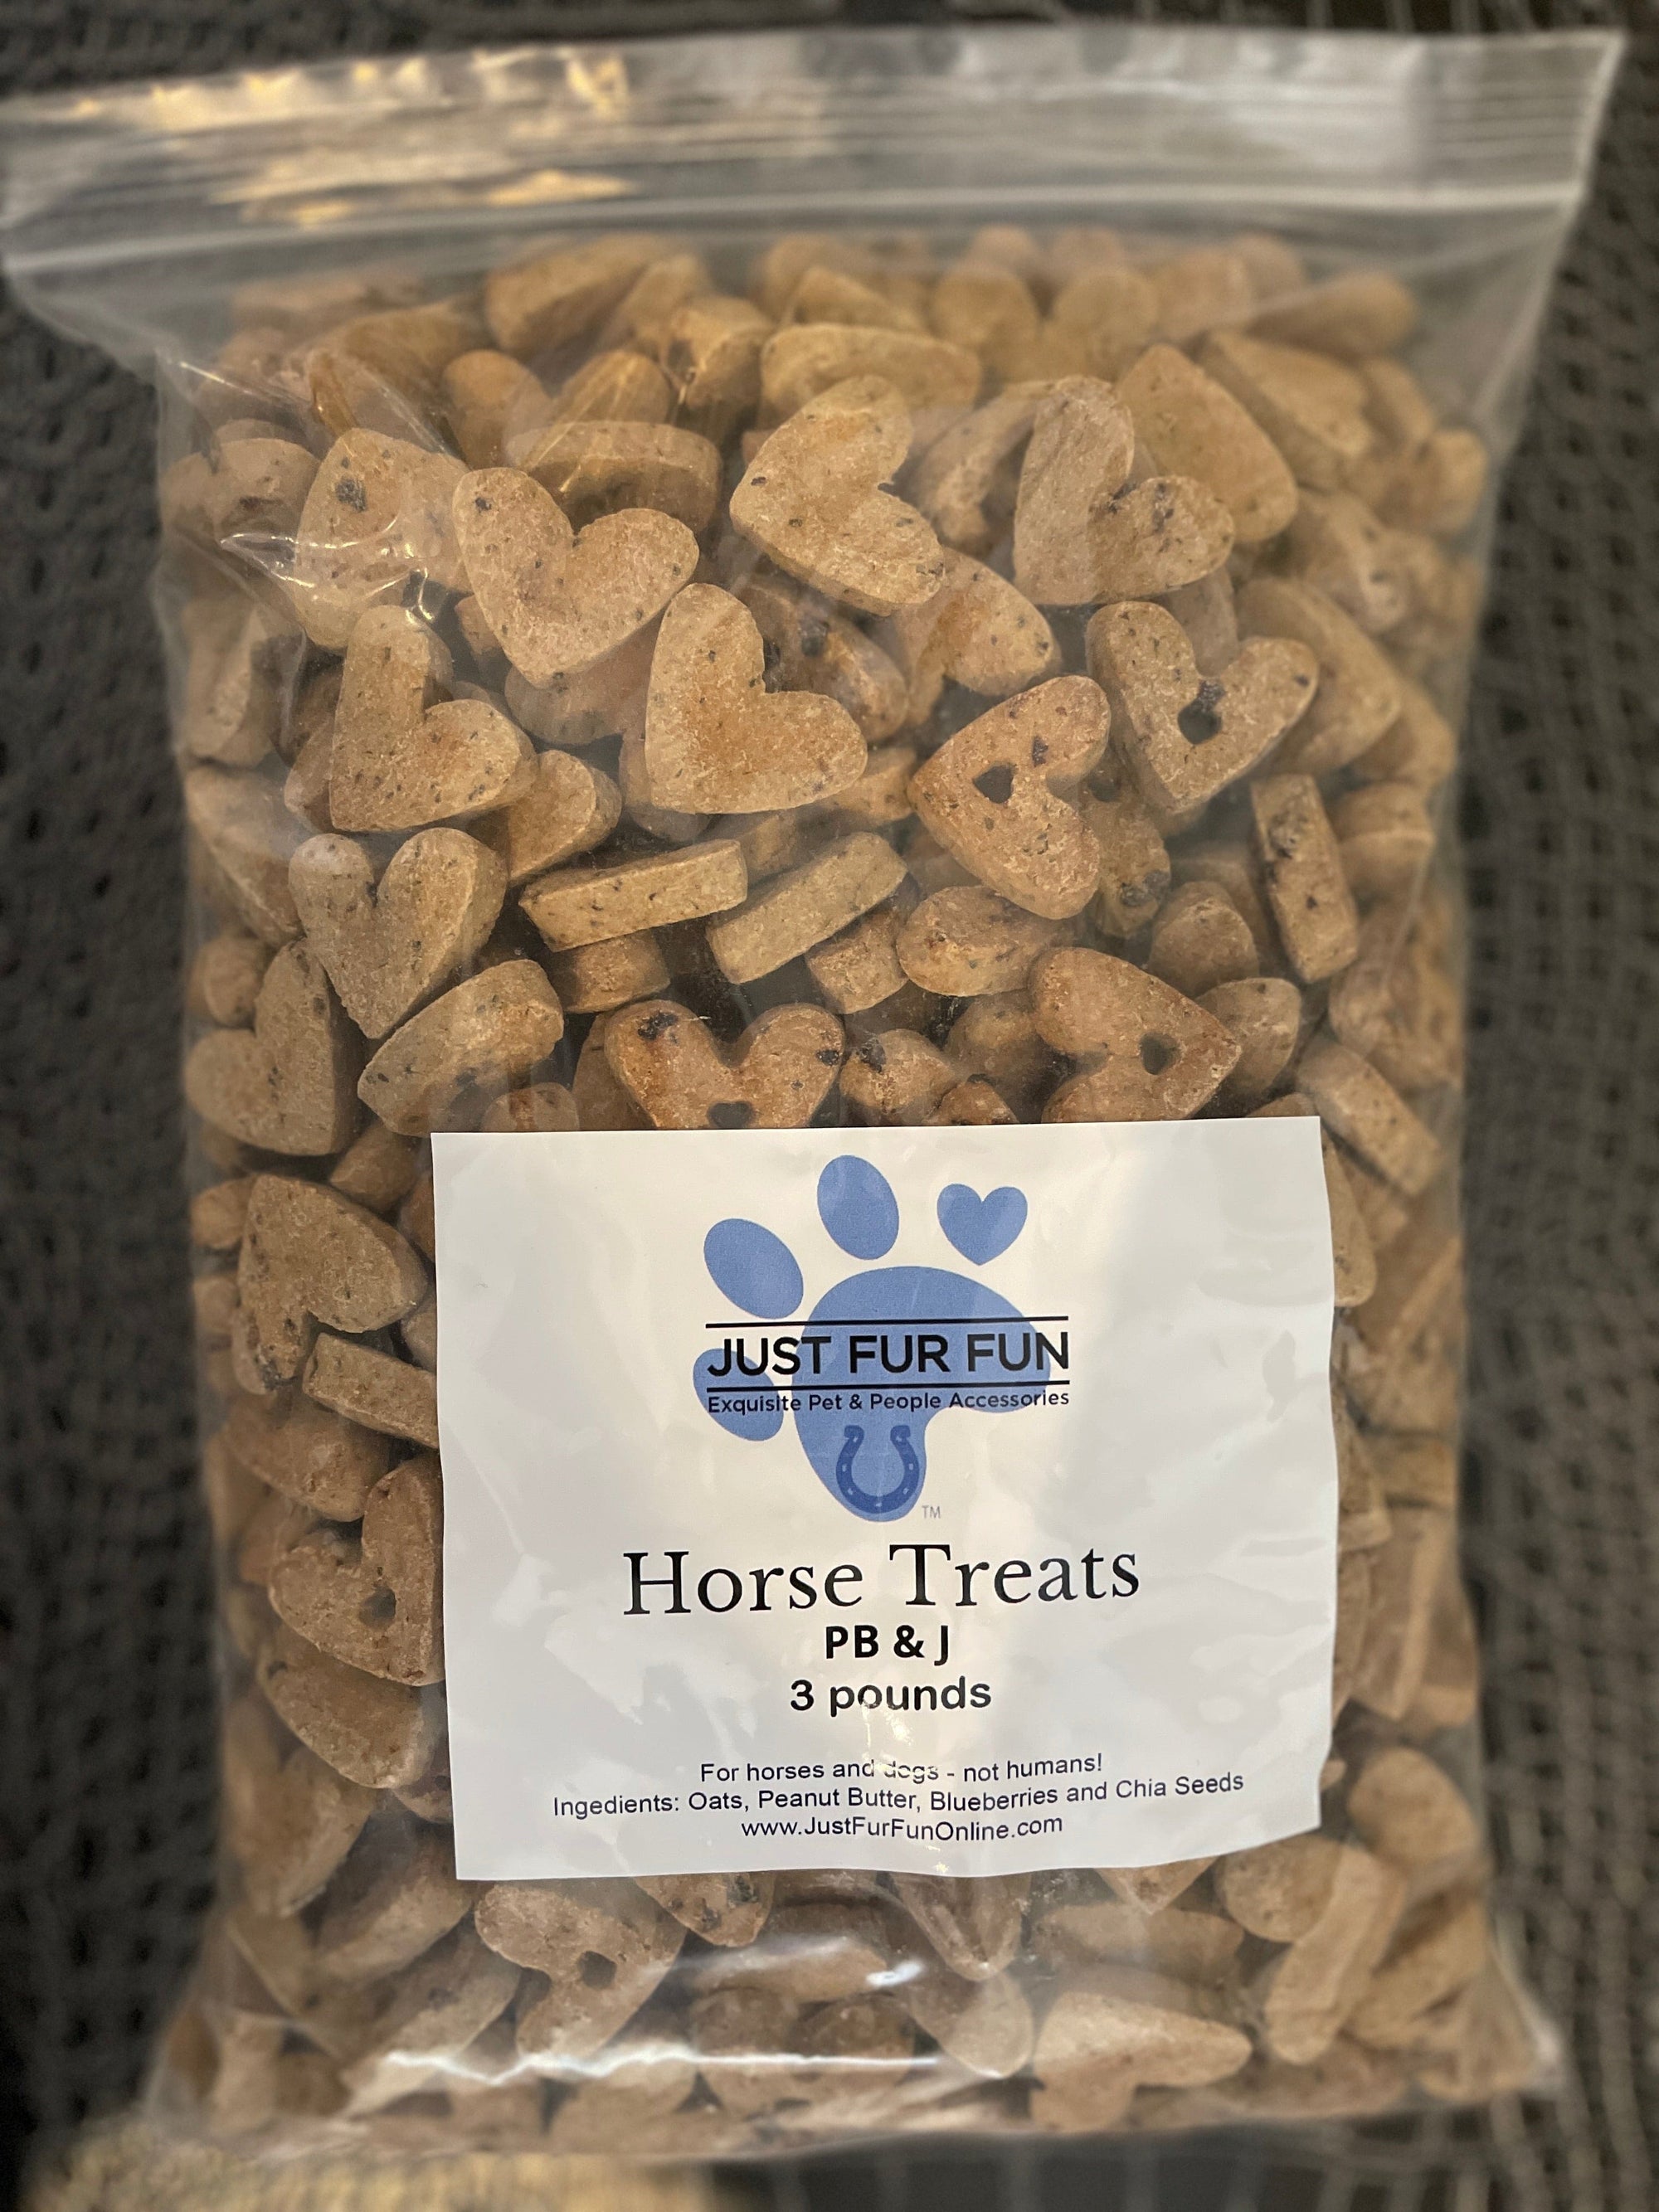 Equestrian Team Apparel PB & J Horse Treats by Just Fur Fun equestrian team apparel online tack store mobile tack store custom farm apparel custom show stable clothing equestrian lifestyle horse show clothing riding clothes horses equestrian tack store